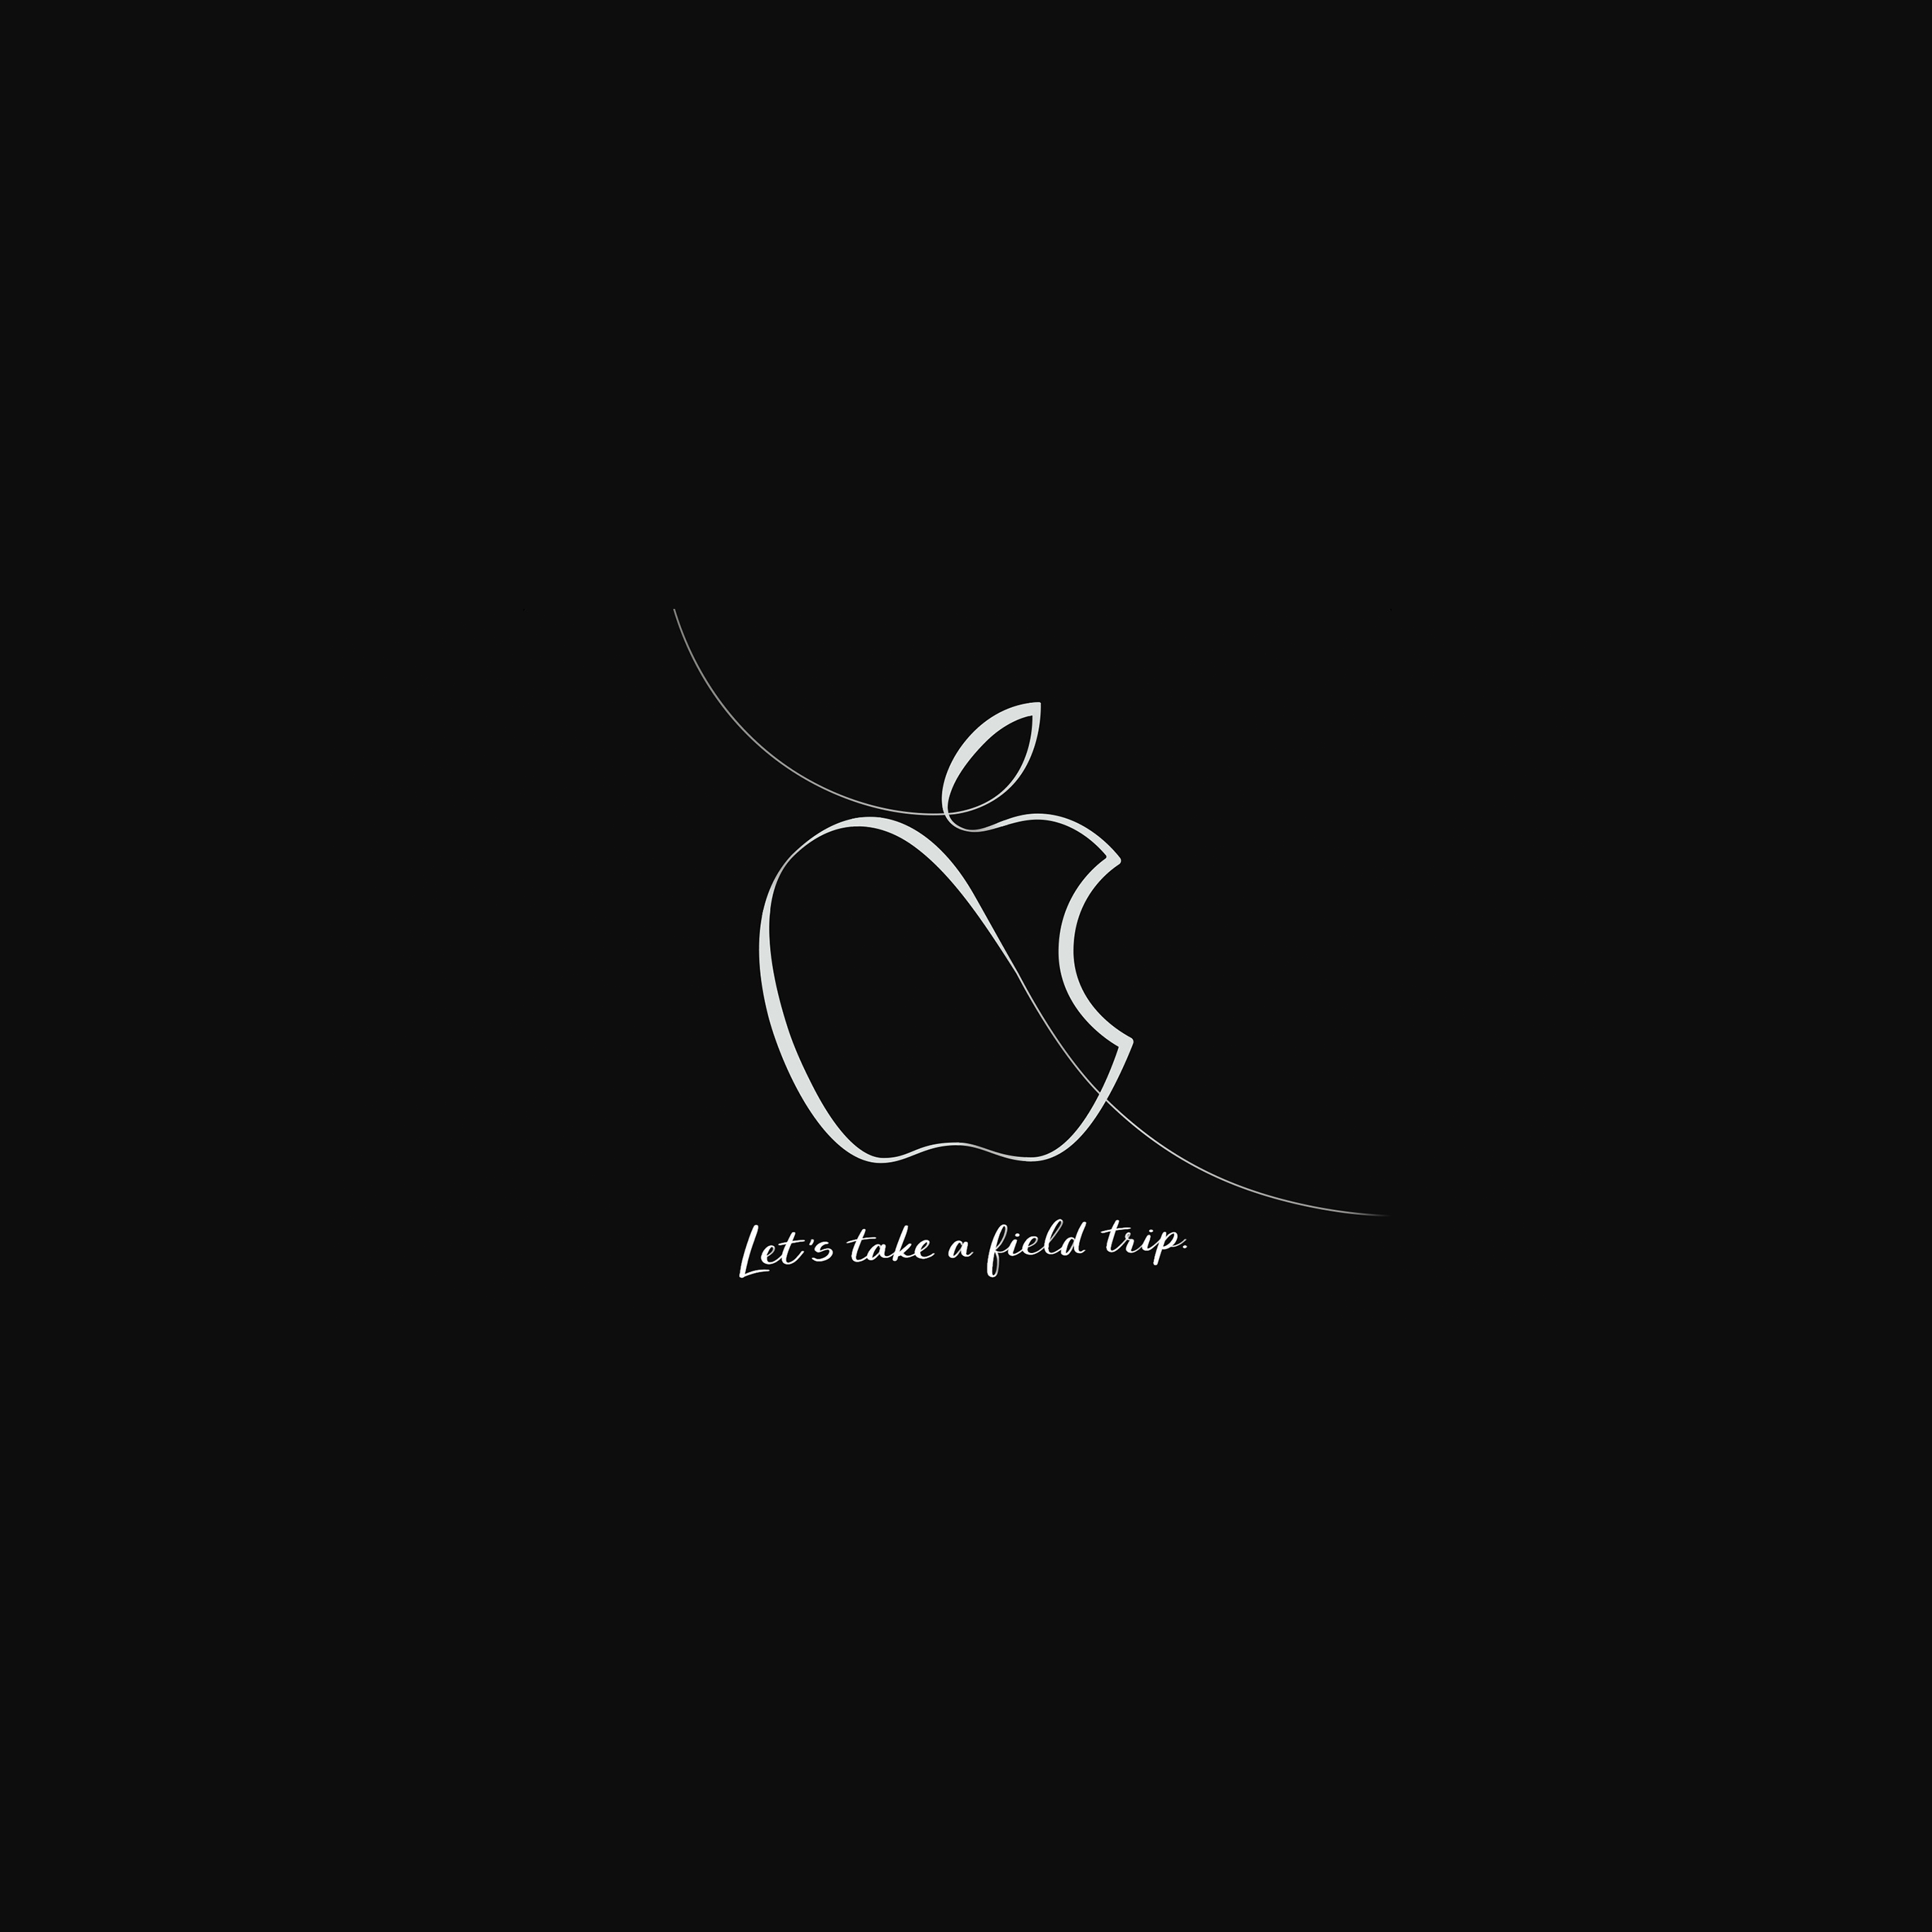 Apple 'Let's take a field trip' media event wallpapers